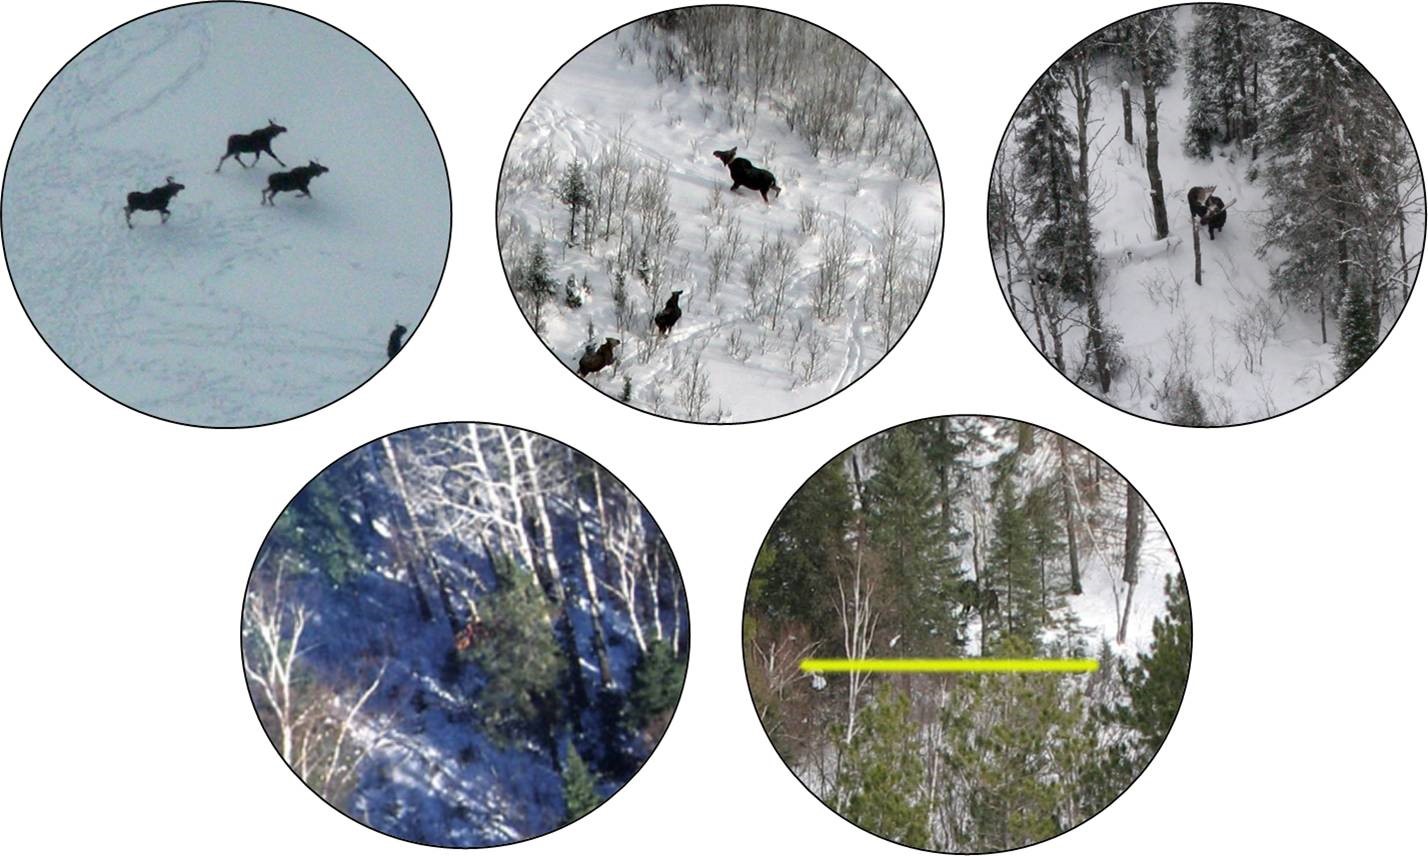 Observations of moose in Minnesota with a circular field of view used to measure the degree of visual obstruction.  Photos by Mike Schrage, Fond du Lac Resource Management Division.